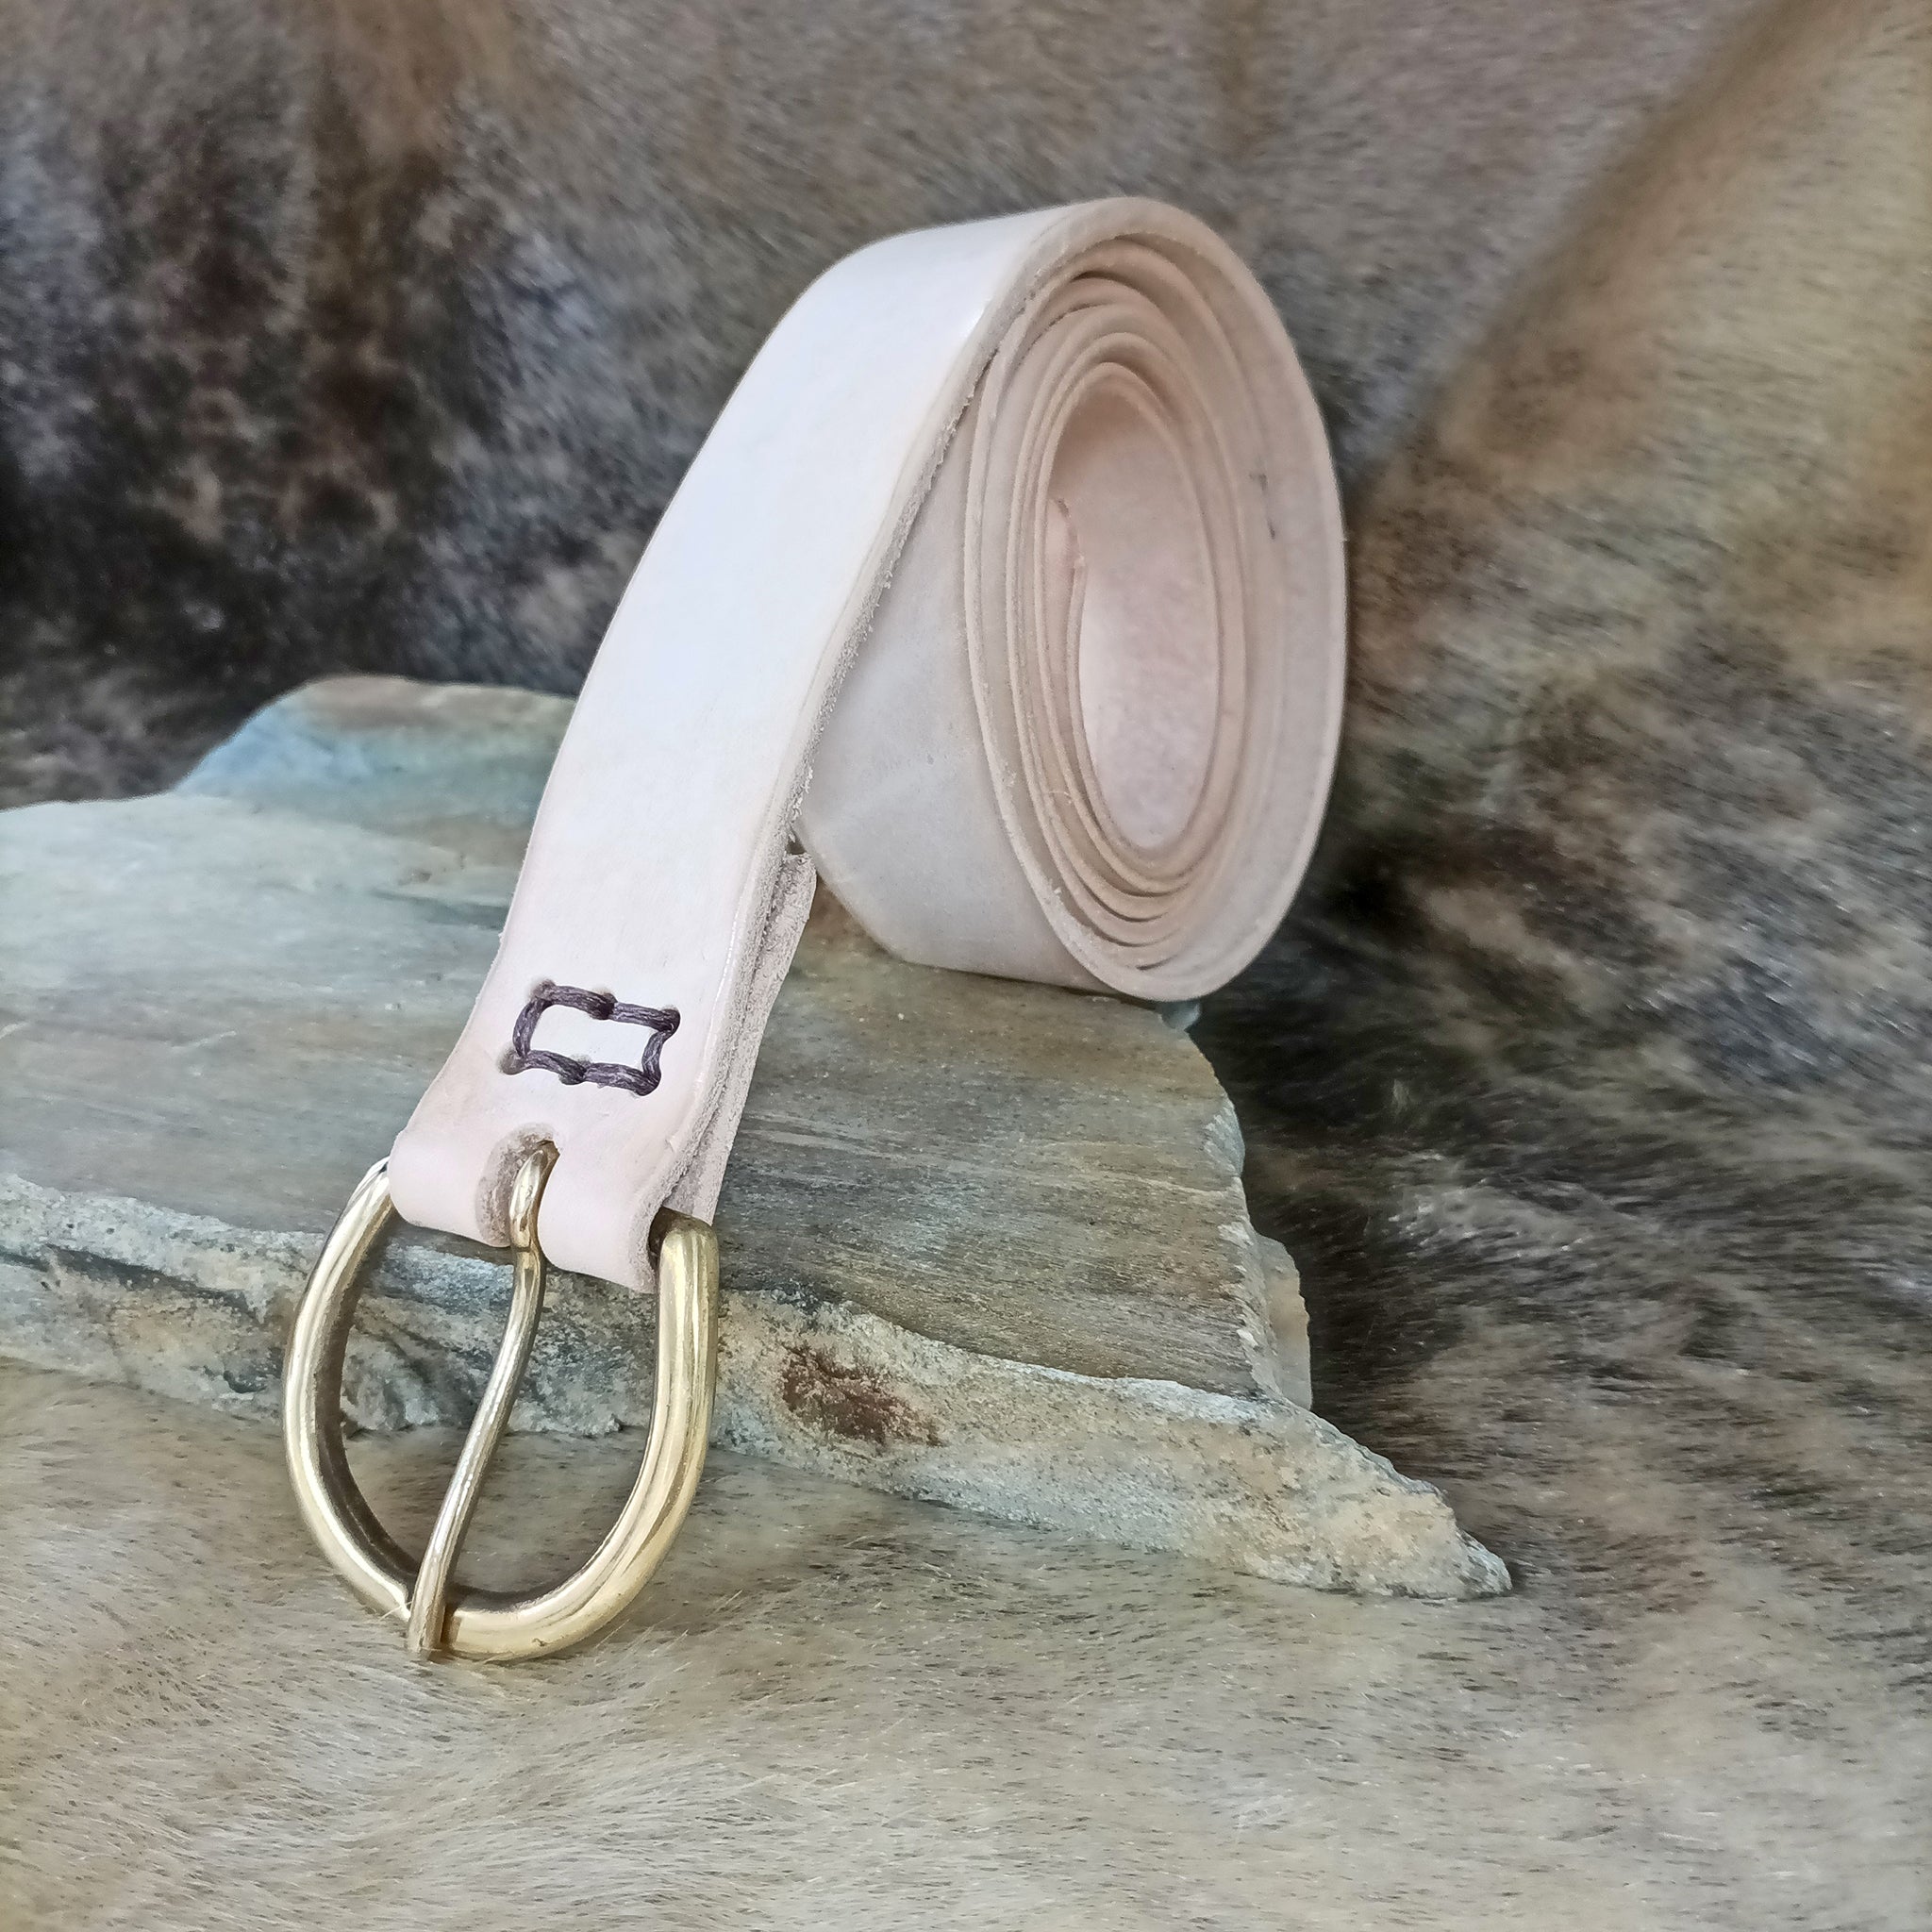 Long Leather Viking Belt with Brass Buckle - 38mm Width - Natural Veg Tan